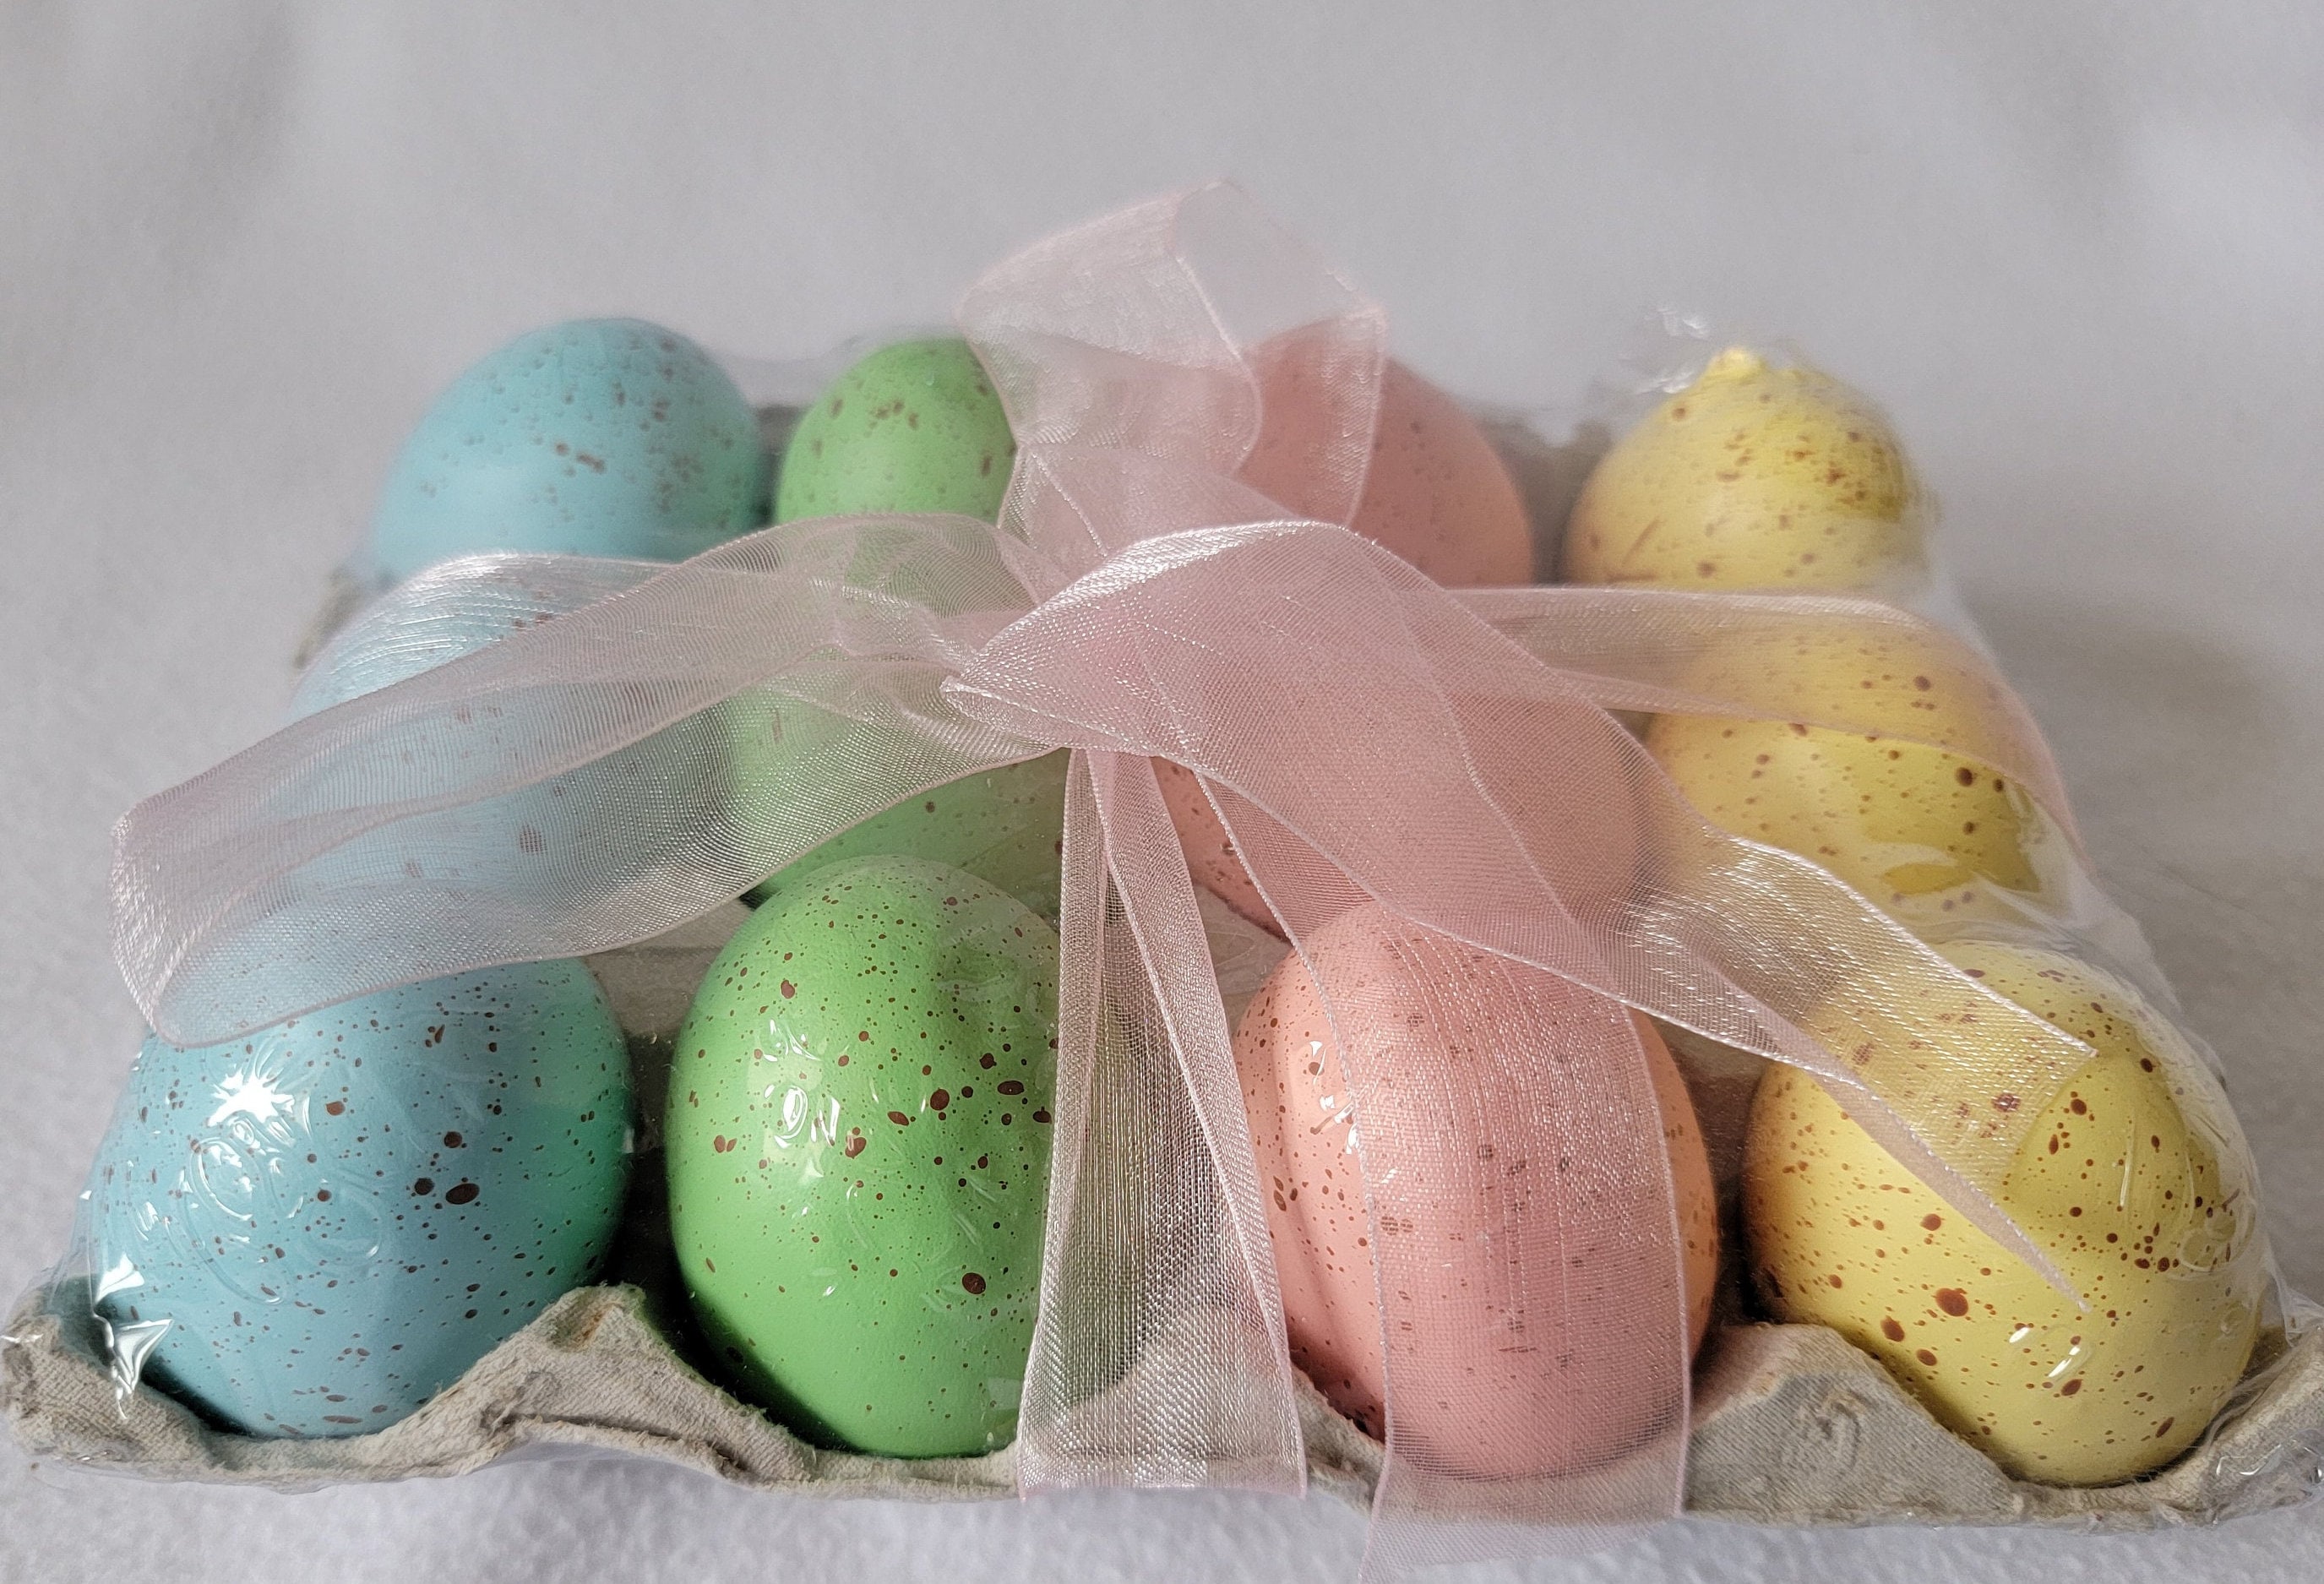 Details about   Easter Holiday Decorative Pastel Speckled Eggs in Carton Set 12 